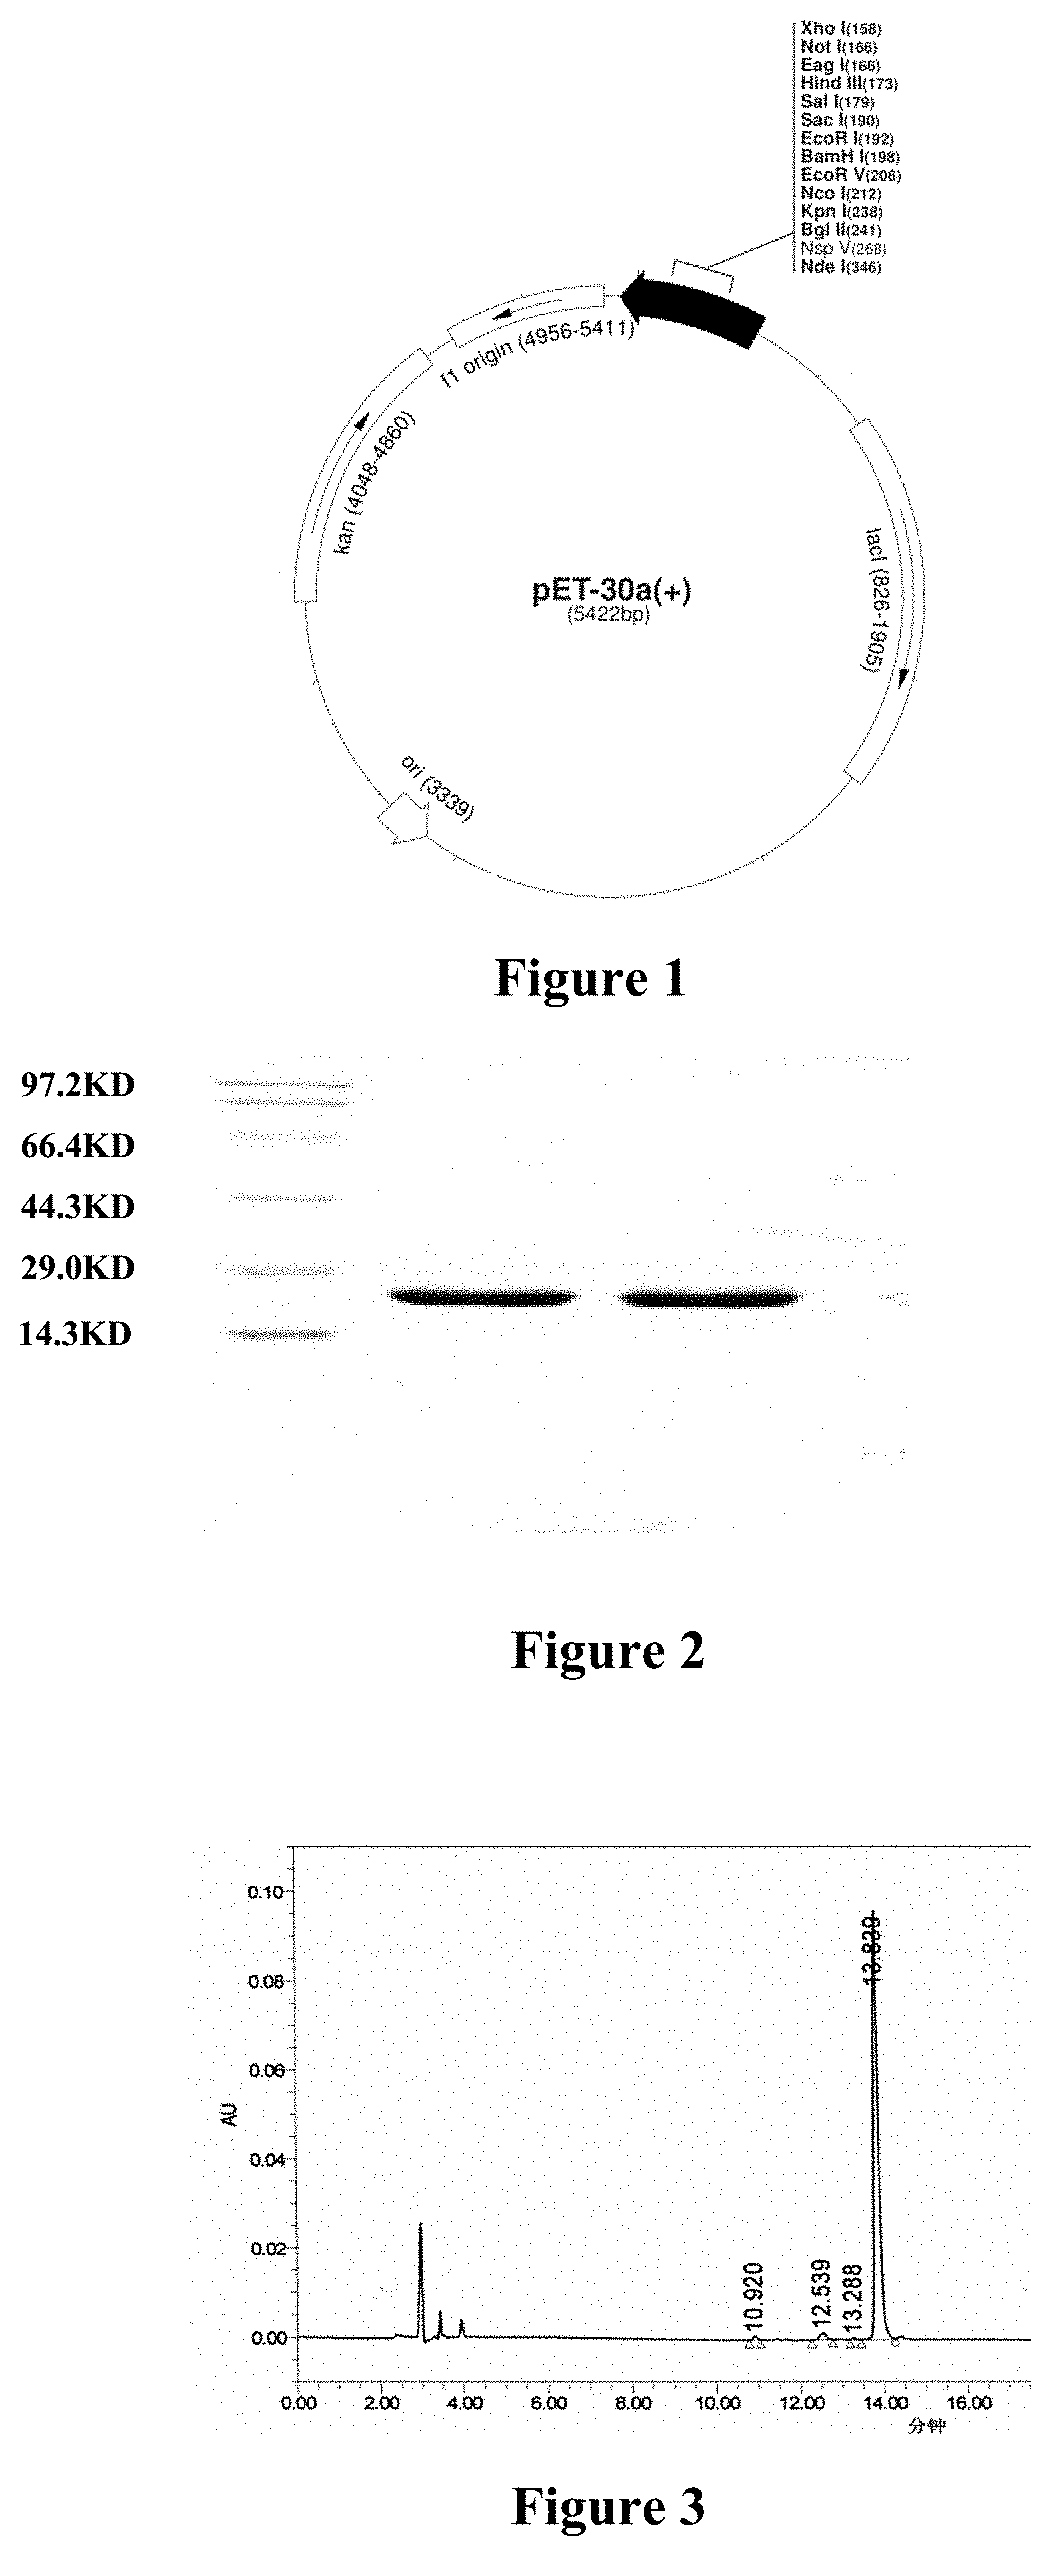 RECOMBINANT HUMAN-BASIC FIBROBLAST GROWTH FACTOR (rh-bFGF) AND PHARMACEUTICAL COMPOSITION COMPRISING rh-bFGF